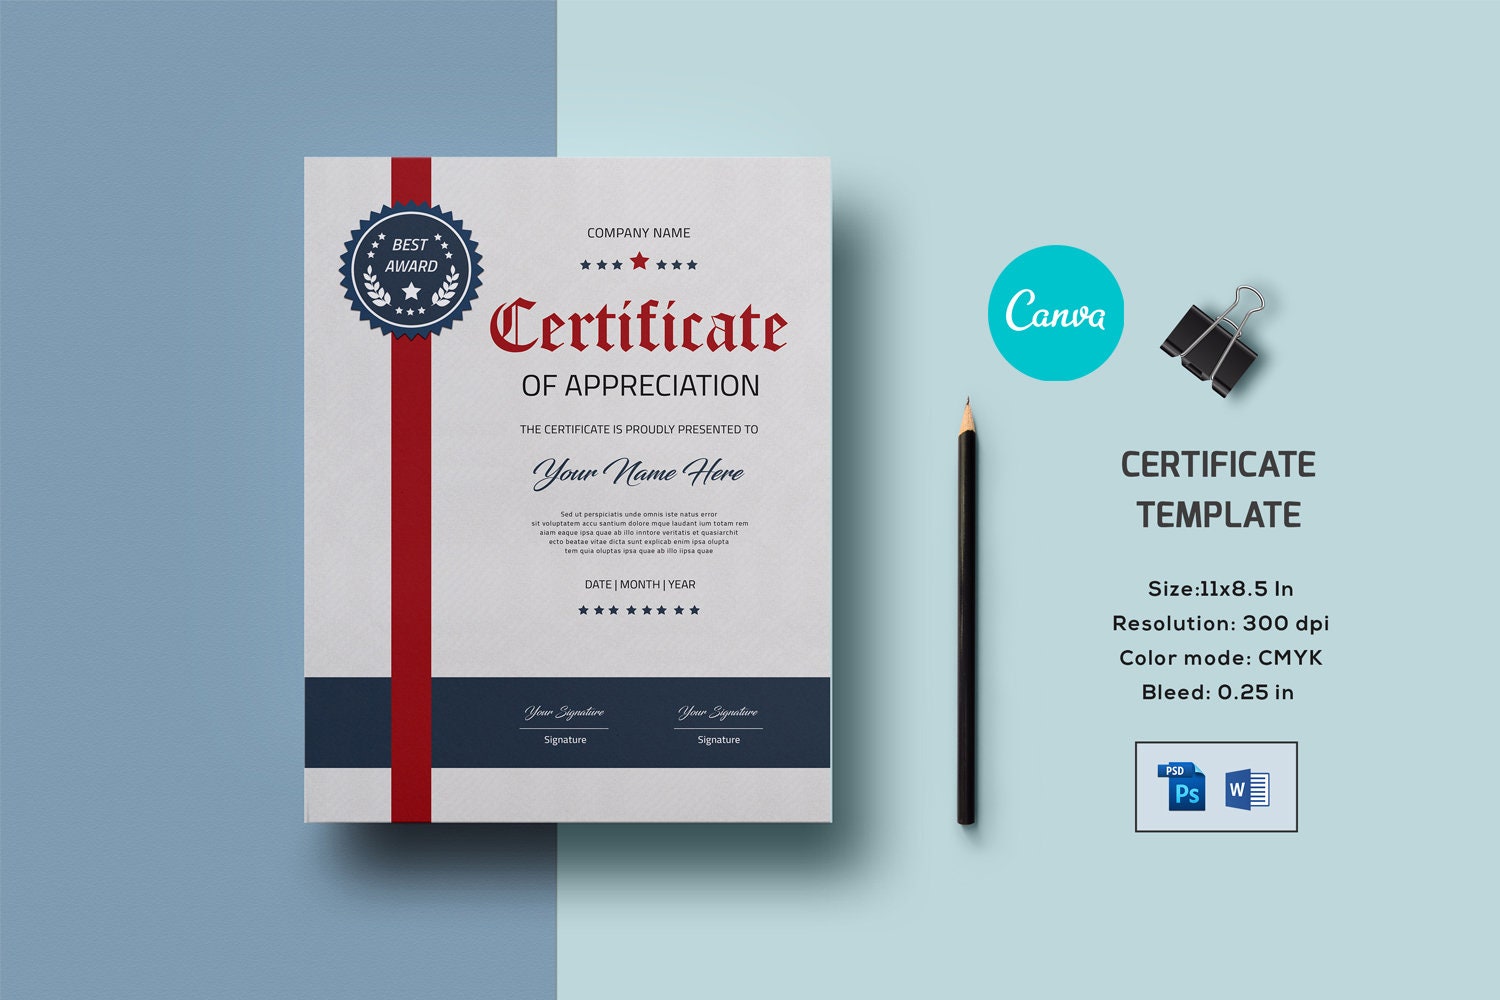 What Is the Ideal Certificate Size?